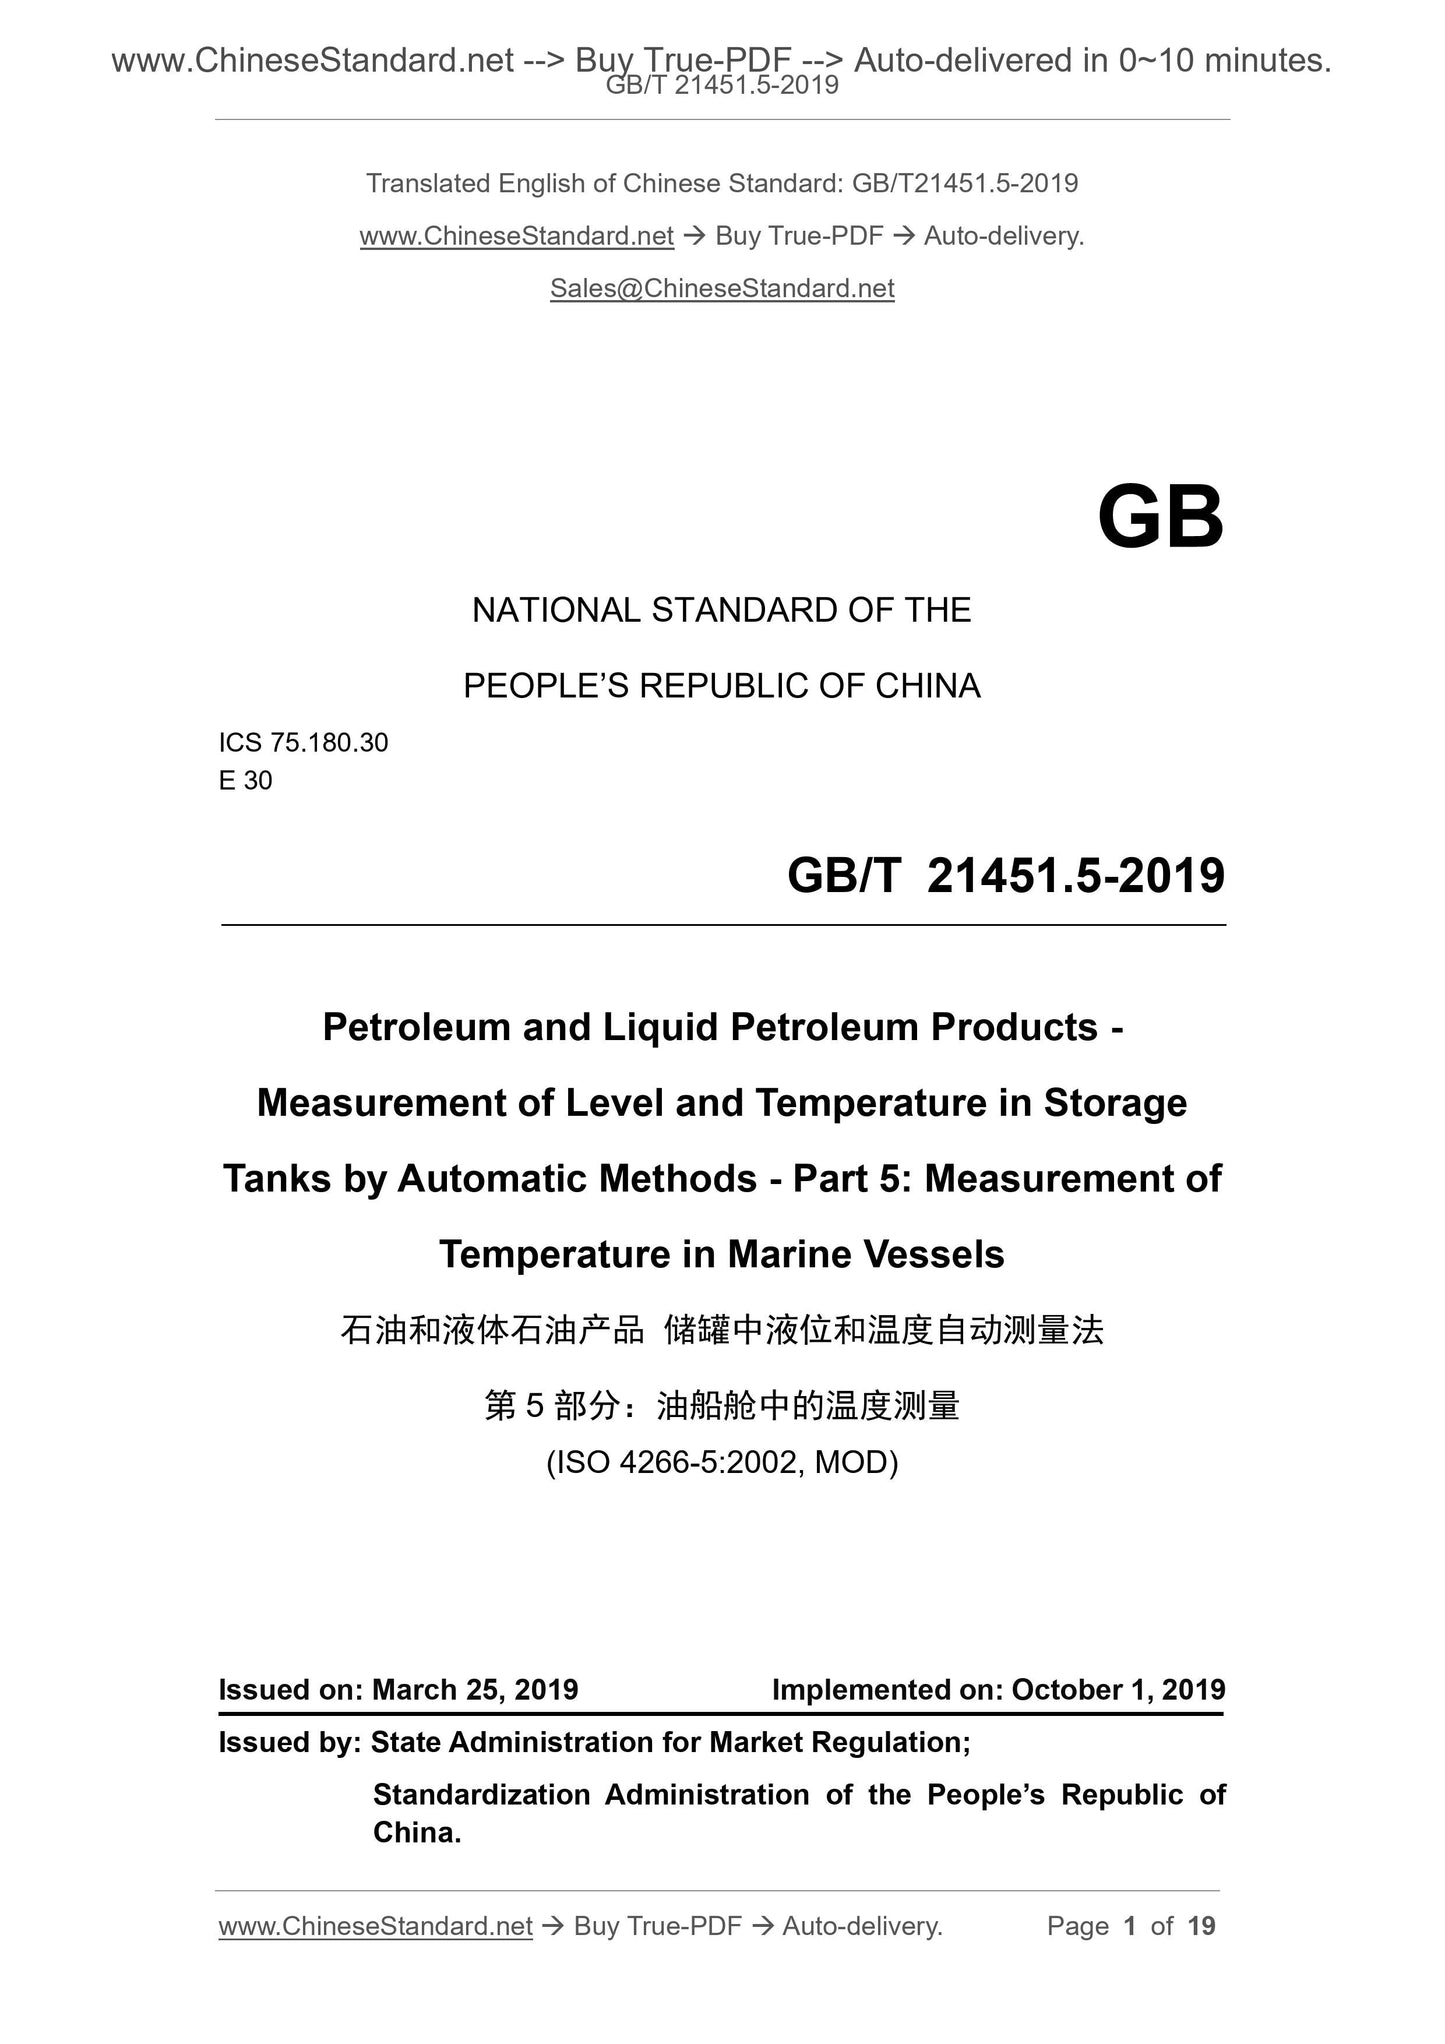 GB/T 21451.5-2019 Page 1